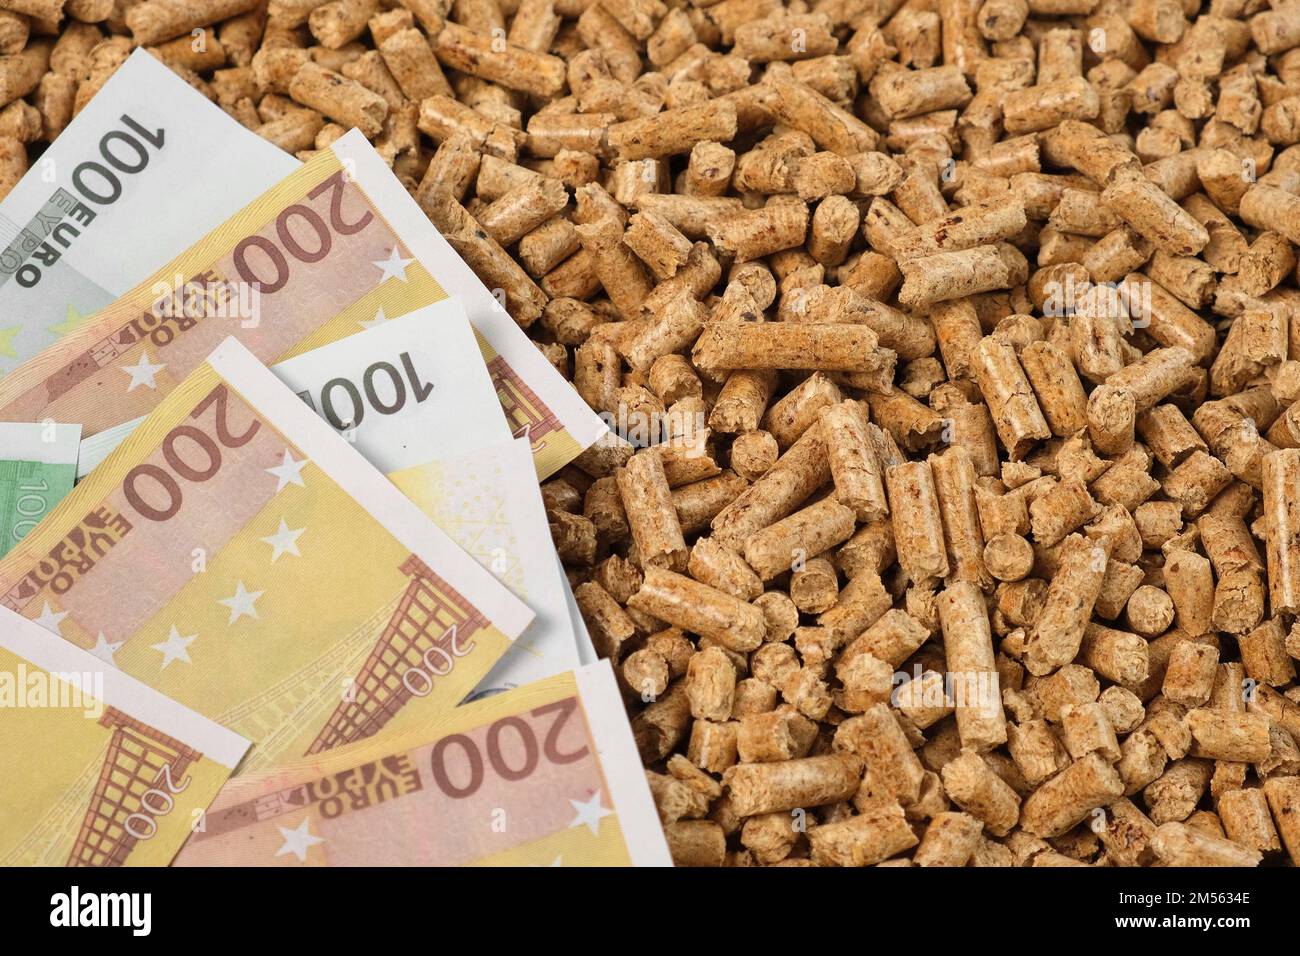 Pellet Fuel. Wood Sawdust Pellets and Paper Banknotes, Money. Euro Currency and Biofuel Compacted Briquettes. Substitute to Coal, Charcoal. World Gas Stock Photo